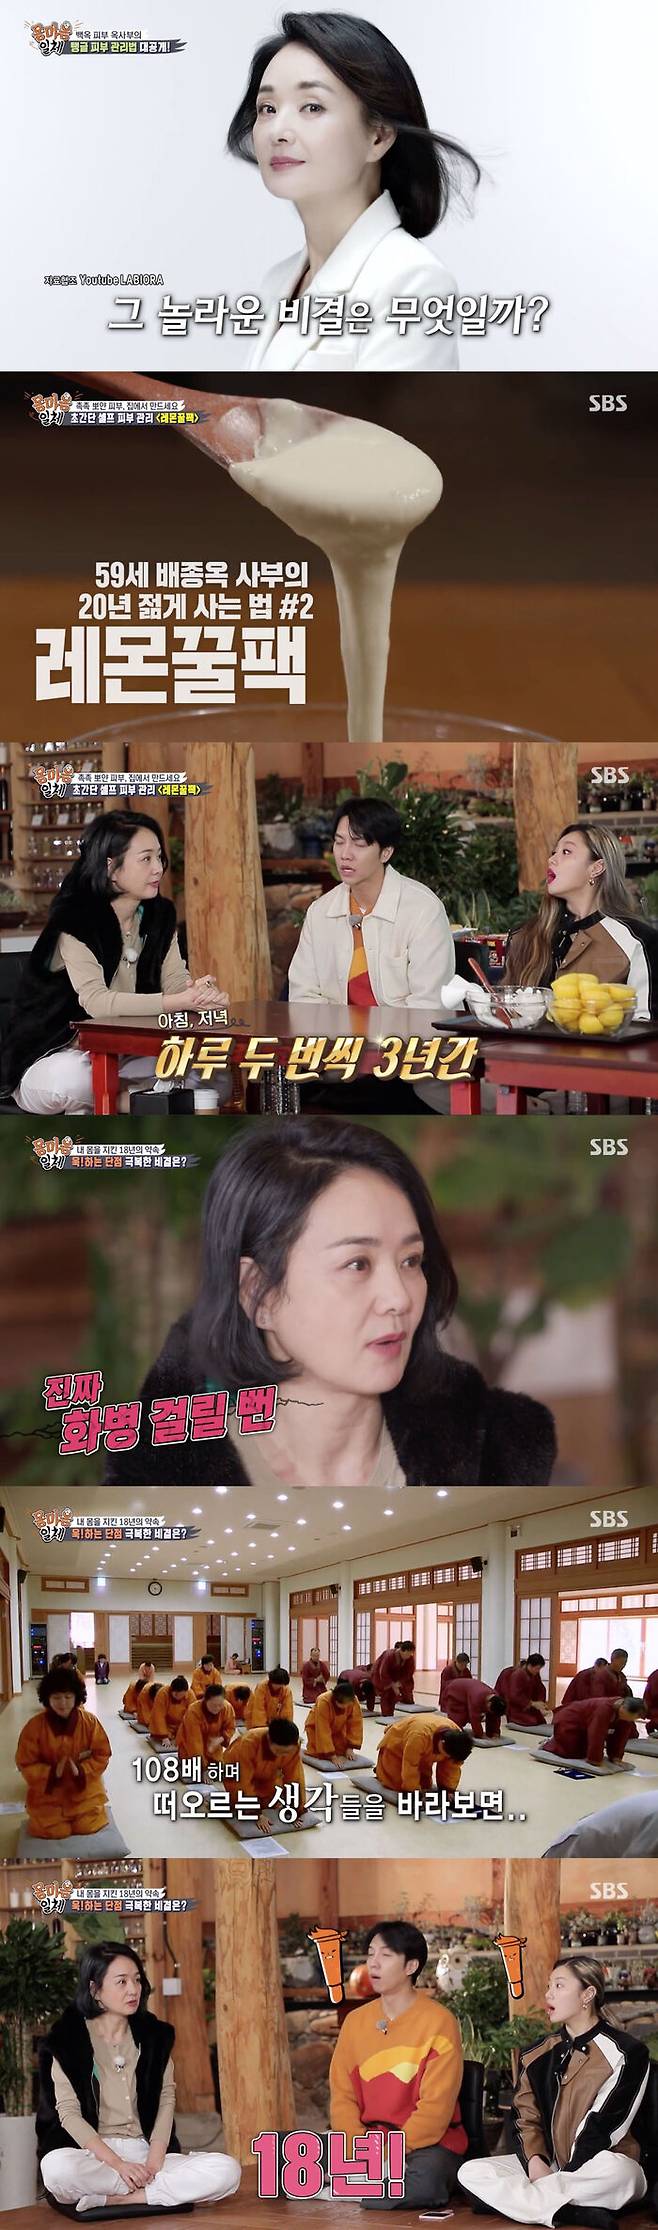 Bae Jong-ok reveals the secret to keeping mind and bodyActor Bae Jong-ok appeared as a master in SBS All The Butlers broadcast on the 20th.On the show, Bae Jong-ok revealed the secret to skin maintenance; he cited lemon honey pack as a secret, saying, I have been managing it for three years in Moy Yat morning and evening.Bae Jong-ok said, The skin was really dry, but in the morning and evening, I had a lemon honey pack and completely dry.He also showed interest in how to make lemon honey packs easy.And Bae Jong-ok said he was able to get rid of his anger with his efforts, saying he was a painter in the past. If he was angry, he could not digest for more than a month.I also got a vase, Confessions said.So I hurt others unintentionally, and then I regretted why I would be the only one, said Bae Jong-ok. I started 108 times because I liked studying my mind.Bae Jong-ok said, I have been doing 108 times Moy Yat for 18 years, he said, I have been understanding my opponent as I look at the thoughts that come up 108 times.And he said, I didnt know I would be this long either, I woke up today and it takes 14 minutes to get fast, 17 minutes to slow down.In addition, Bae Jong-ok said that when he first studied his mind, he passed 200 days of what was his goal for the first month, and he was proud of himself and boasted to the monk, saying, I think there was something good.And since then, it has been 108 times in 18 years.Bae Jong-ok mentioned the power of consistency, saying that he had the courage to overcome some hard work through such processes.So, Yang said, It is not the power that the droplets pierce the rocks, but the consistency.On this day, Bae Jong-ok offered no sincere advice on his students troubles, and also recommended meditation as a means of getting answers for himself.Bae Jong-ok said, Speed ​​efforts are as memorable as the body is Memory. This effort seems to have kept me.And it seems that it is clear that I will live harder and harder for my life, given time, given to me through such efforts. 